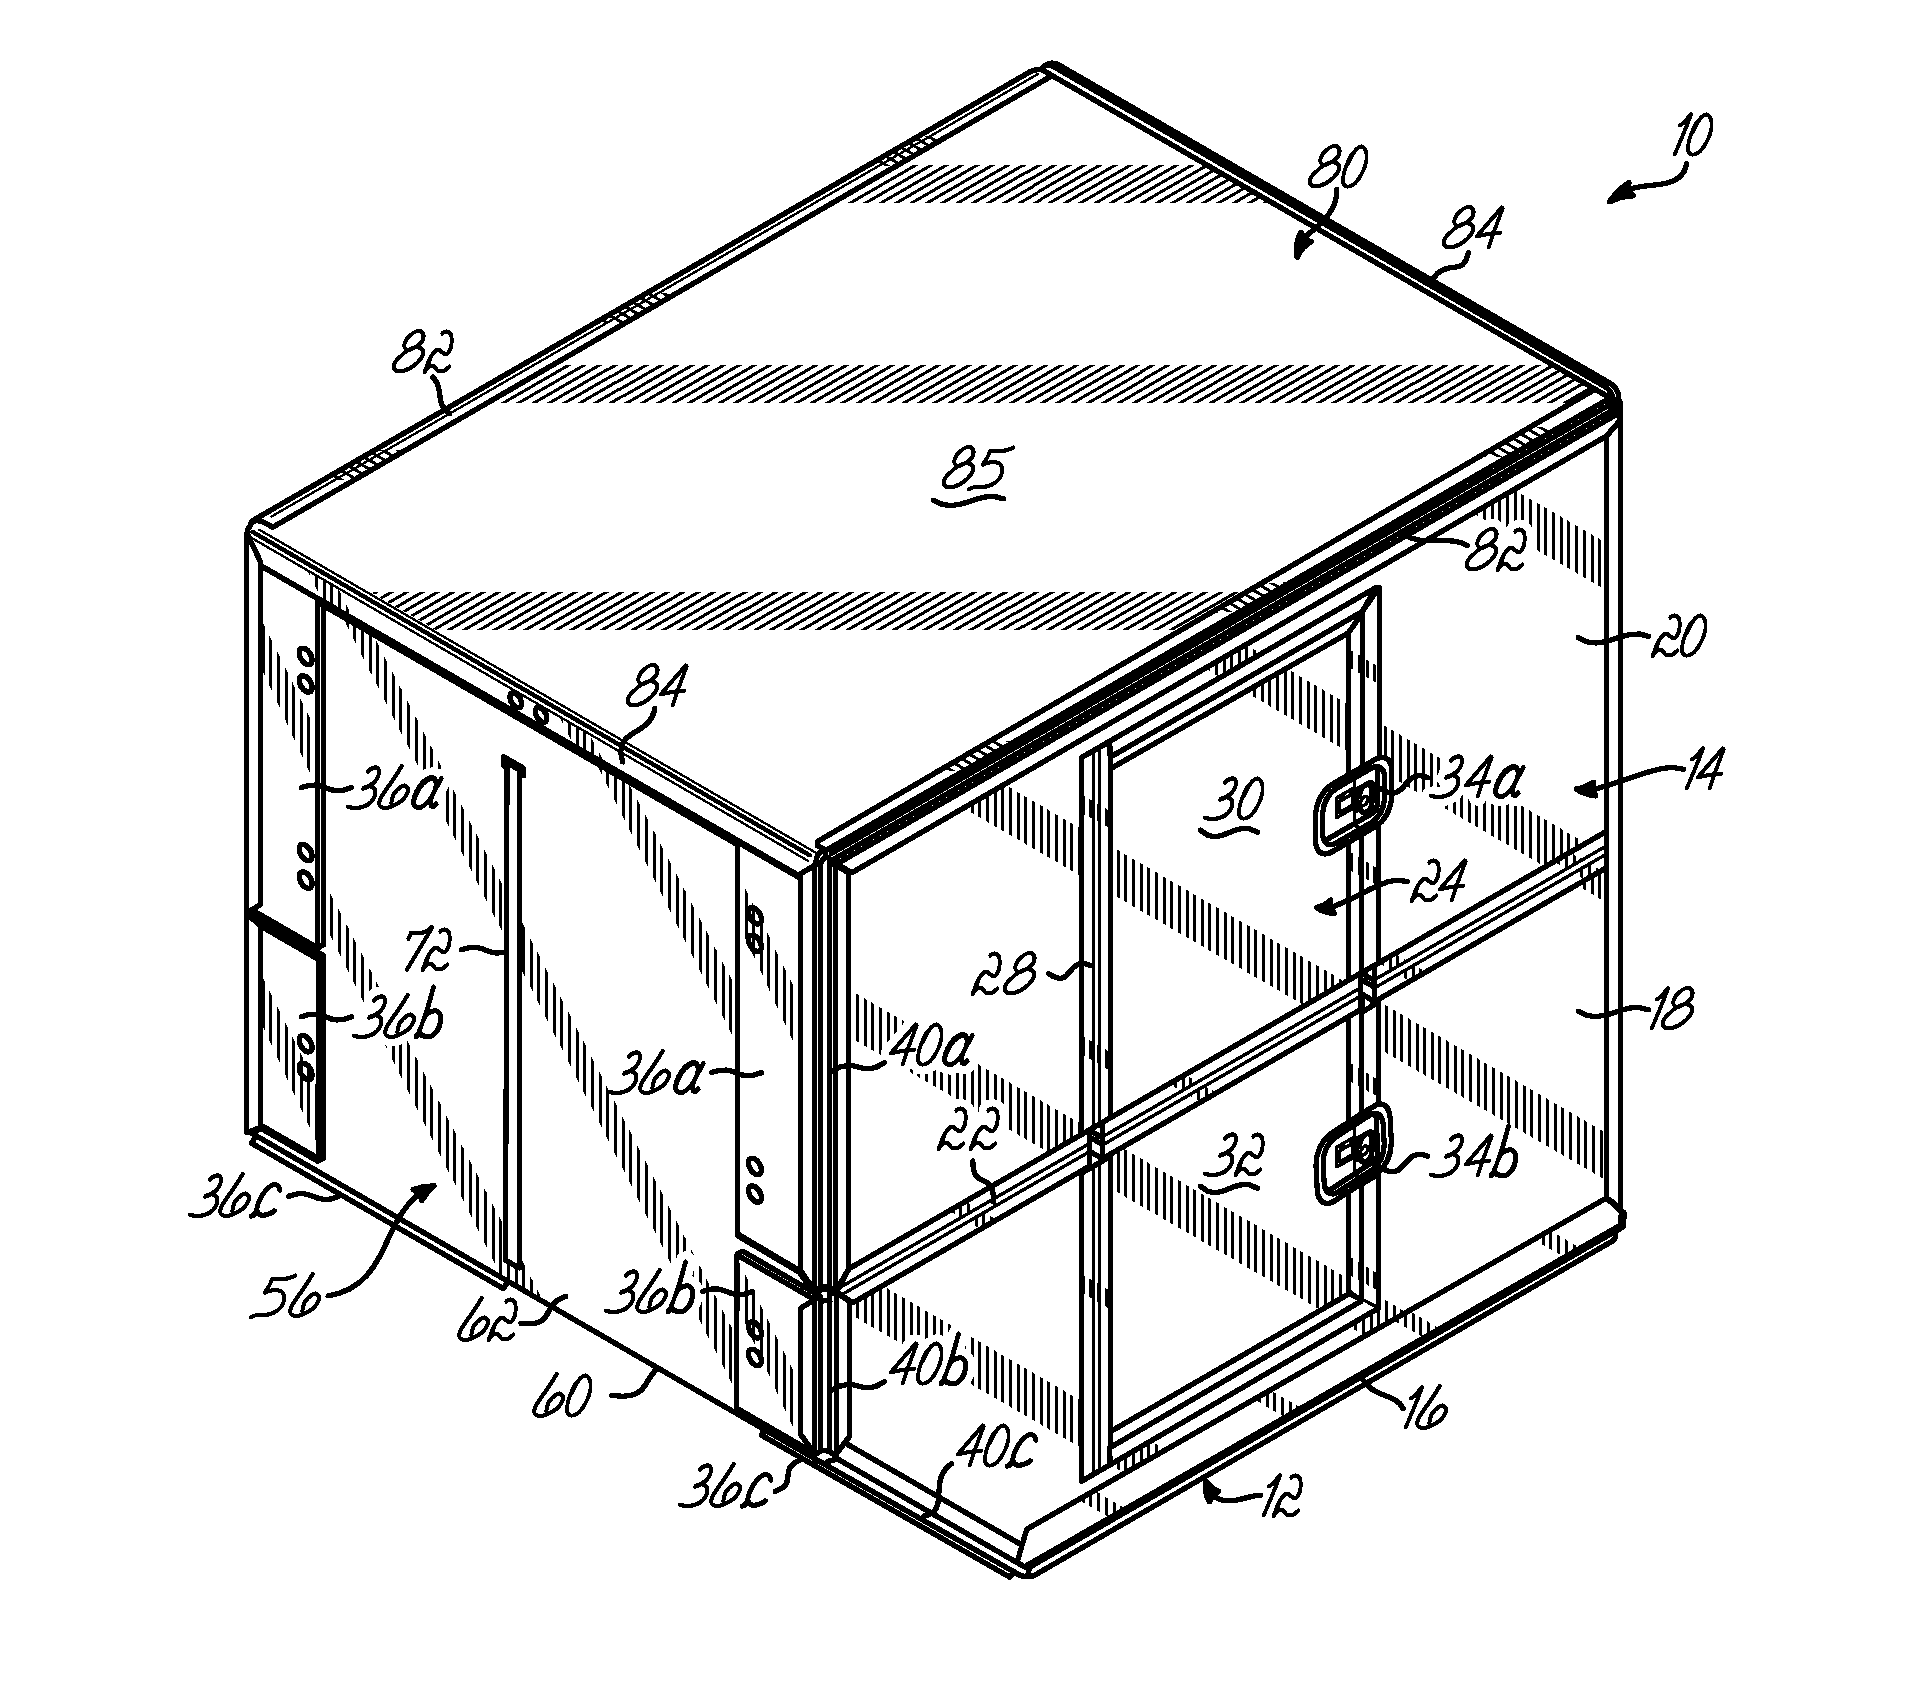 Collapsible Container For Air Shipment Cargo and Method of Use